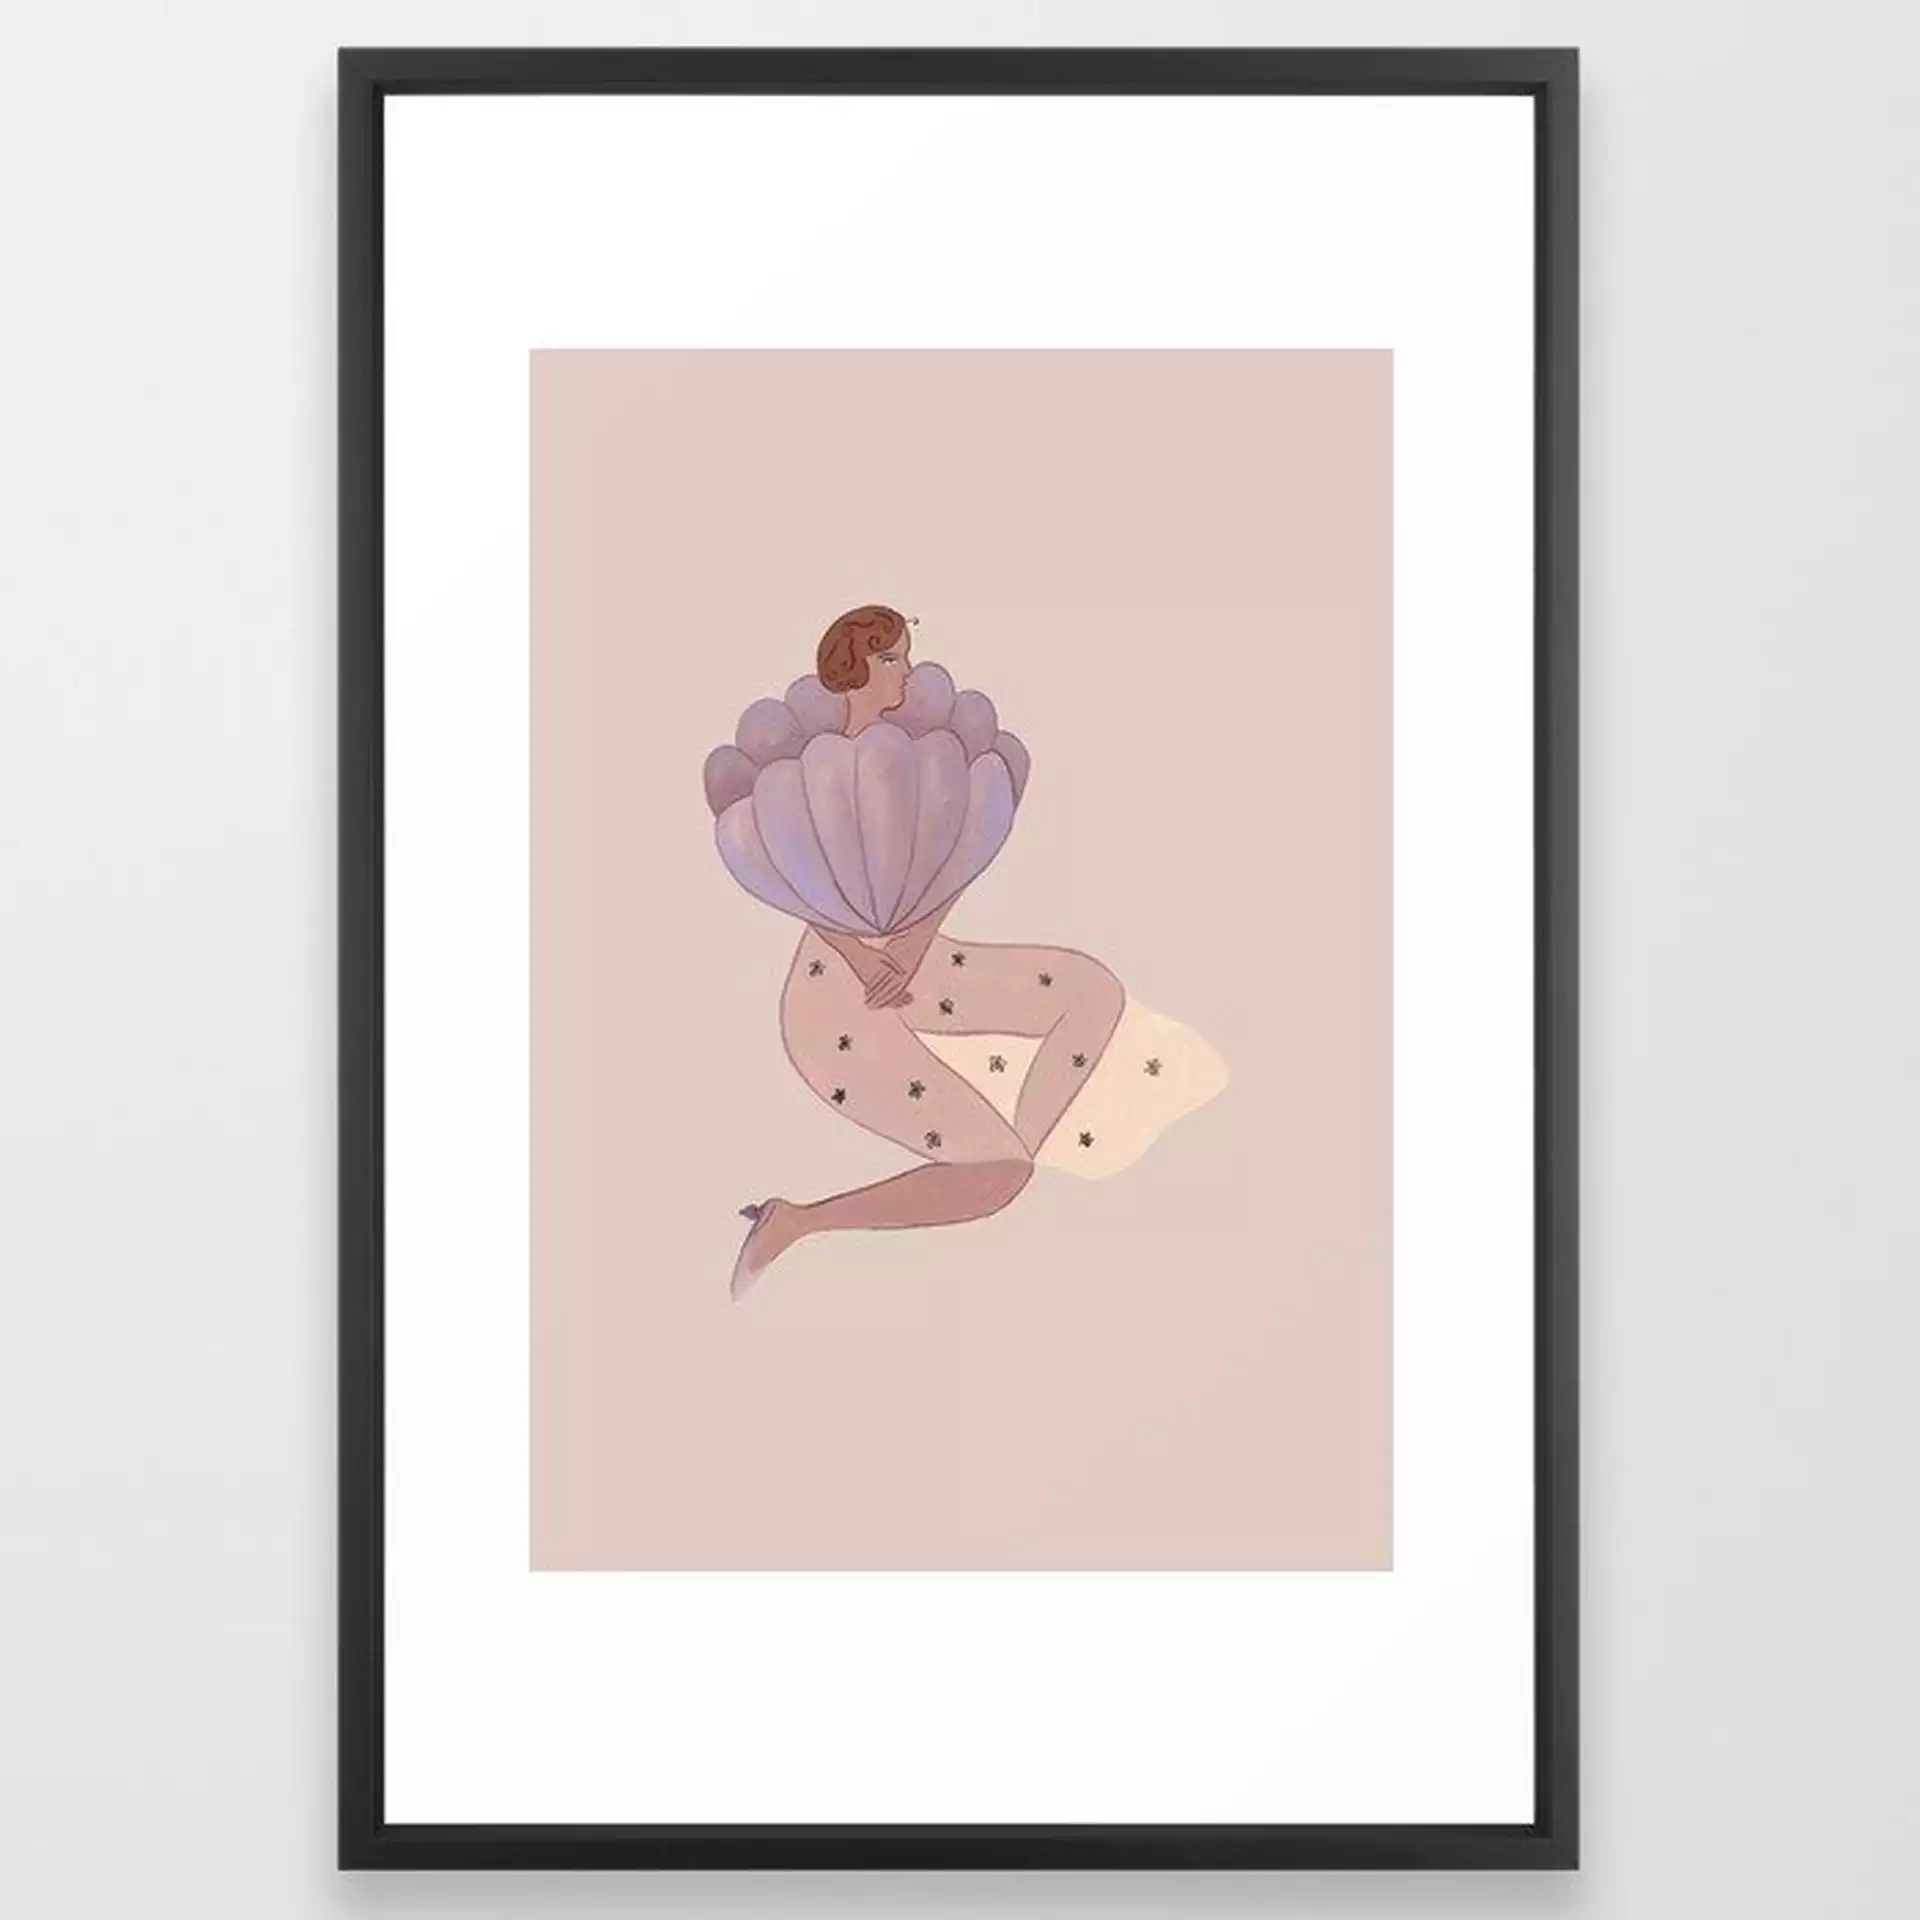 Anatomy Of An Introvert Framed Art Print by Isabelle Feliu - Vector Black - LARGE (Gallery)-26x38